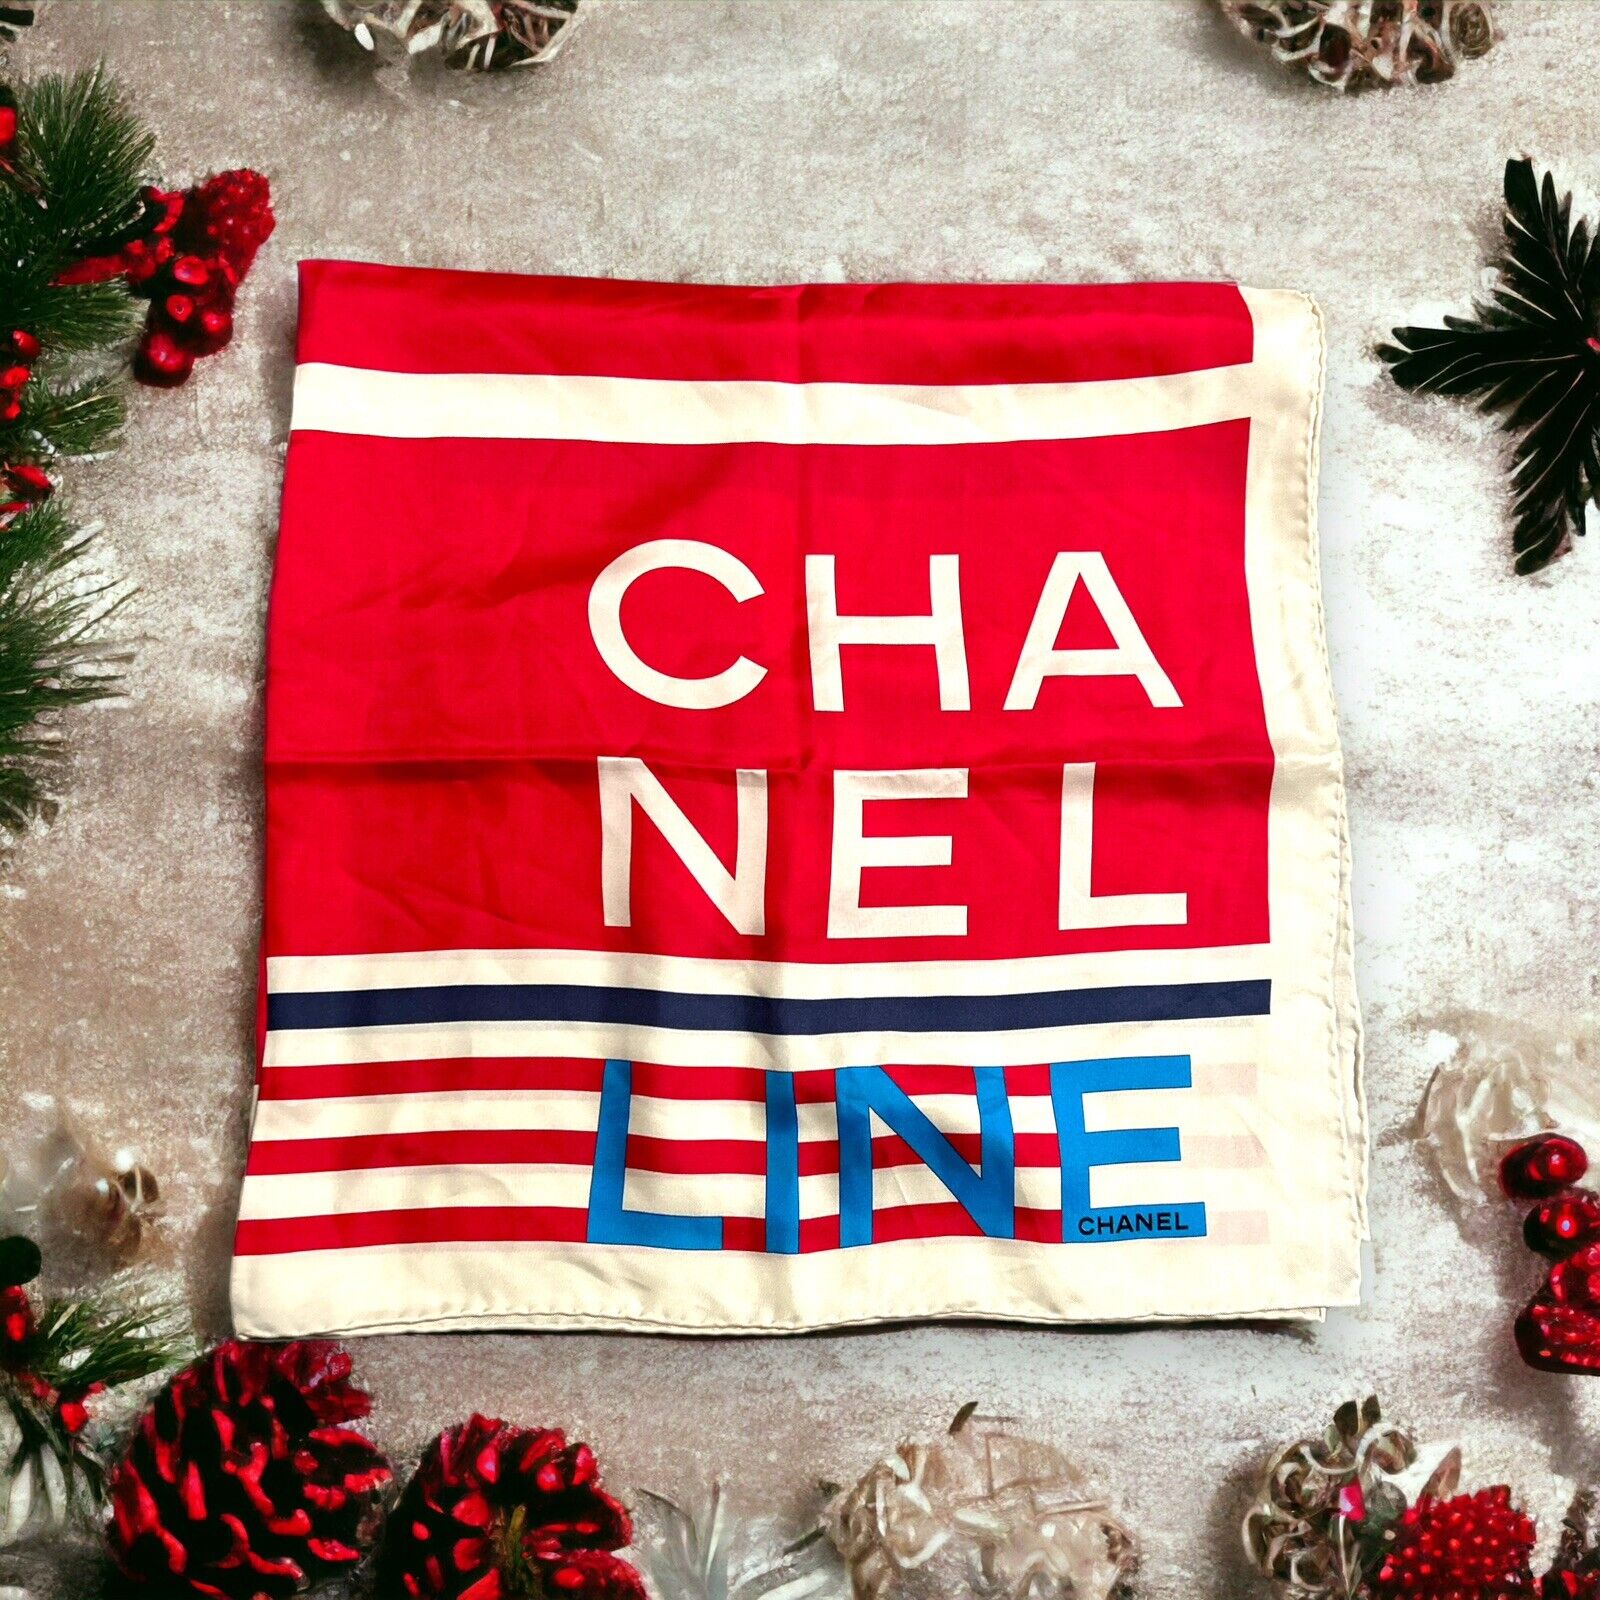 Authentic Chanel Silk Scarf - image 5